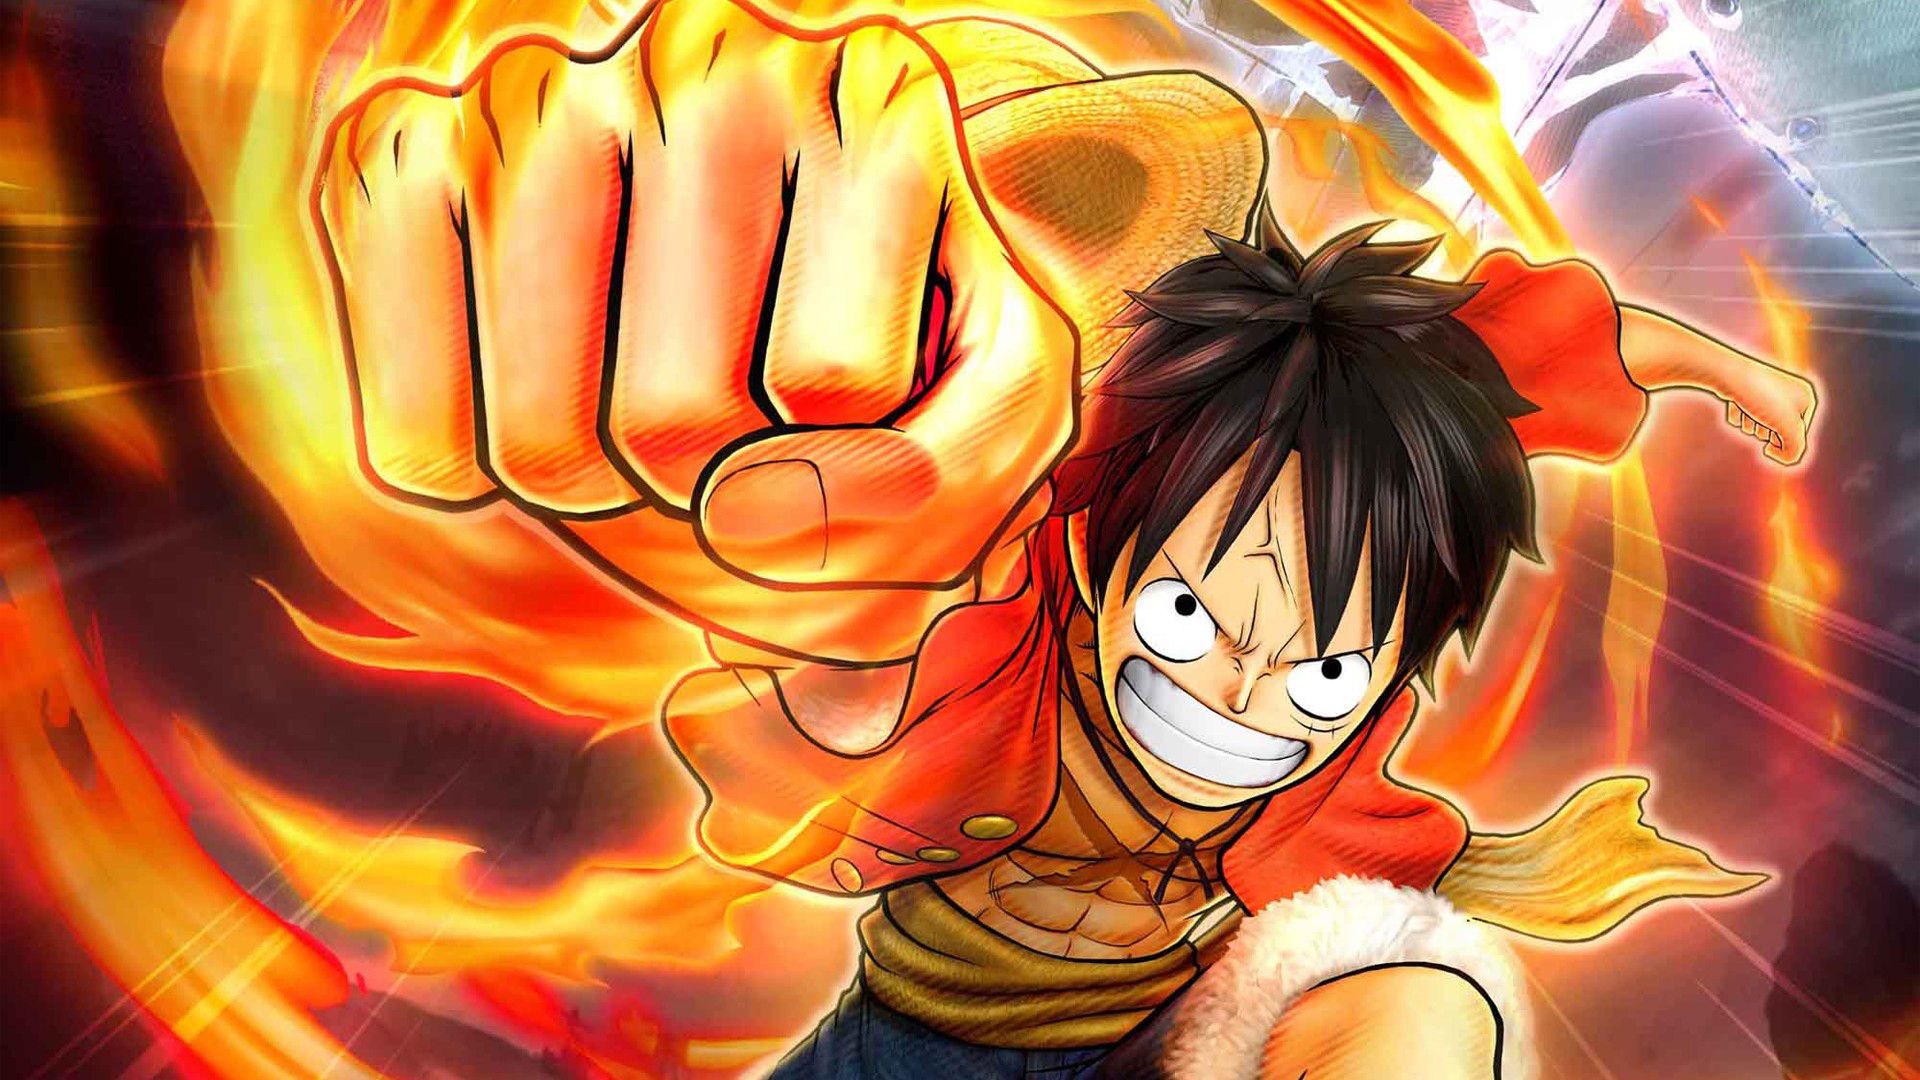 One-Piece-Anime-Wallpaper-Full-HD-Free-Download-PC-Macbook-Laptop-171121--36  -  - Free HD Wallpapers Download for Desktop Computer